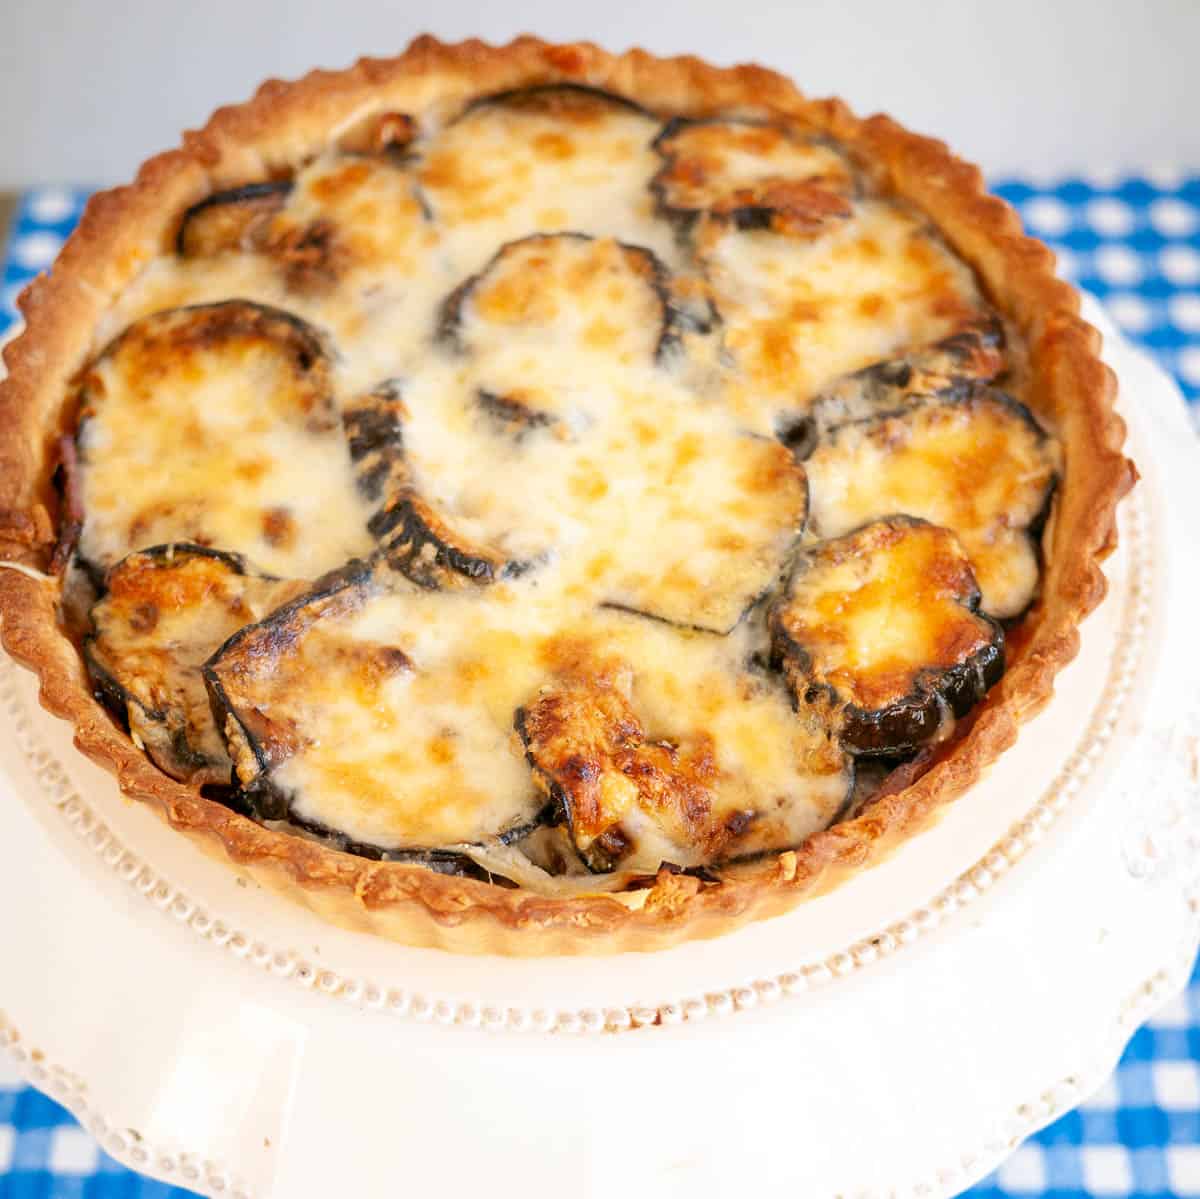 Cheesy Grilled Eggplant and Onion Quiche